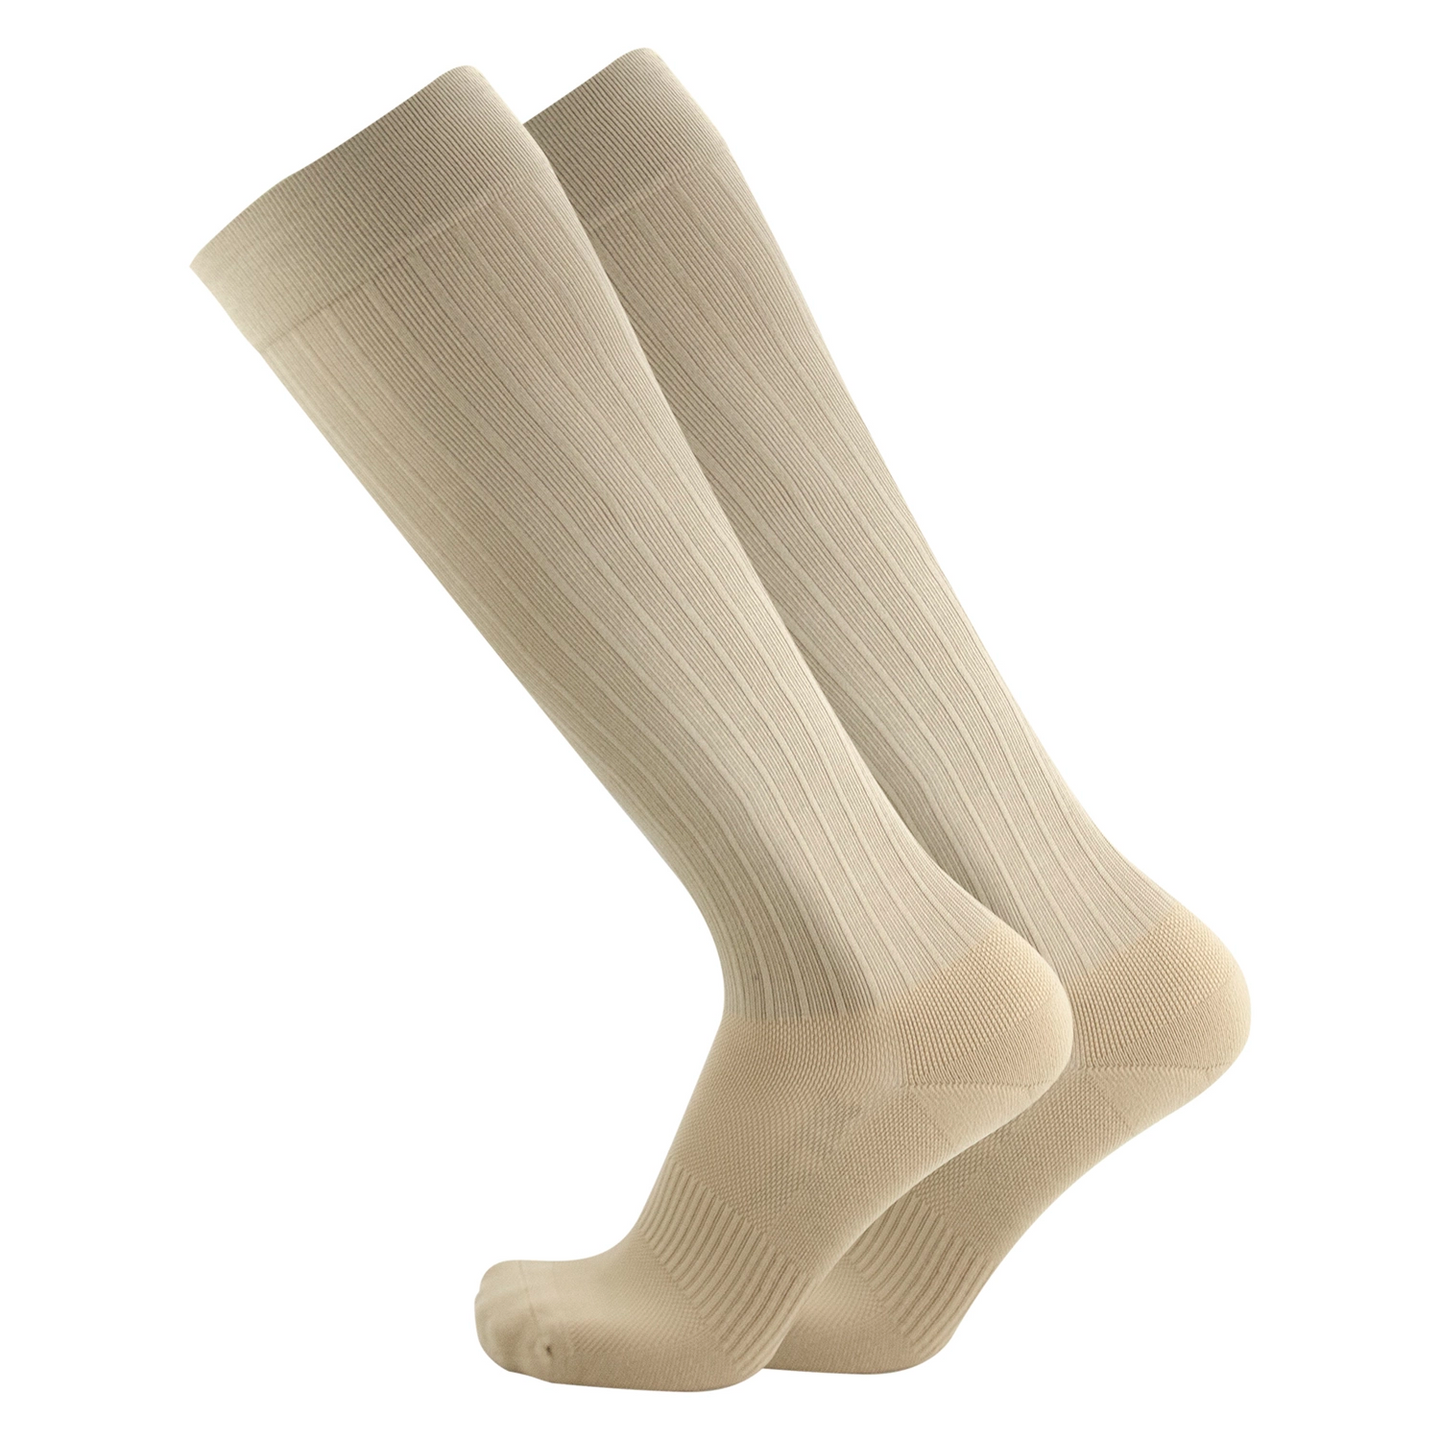 What are medical grade compression socks and how do they work?